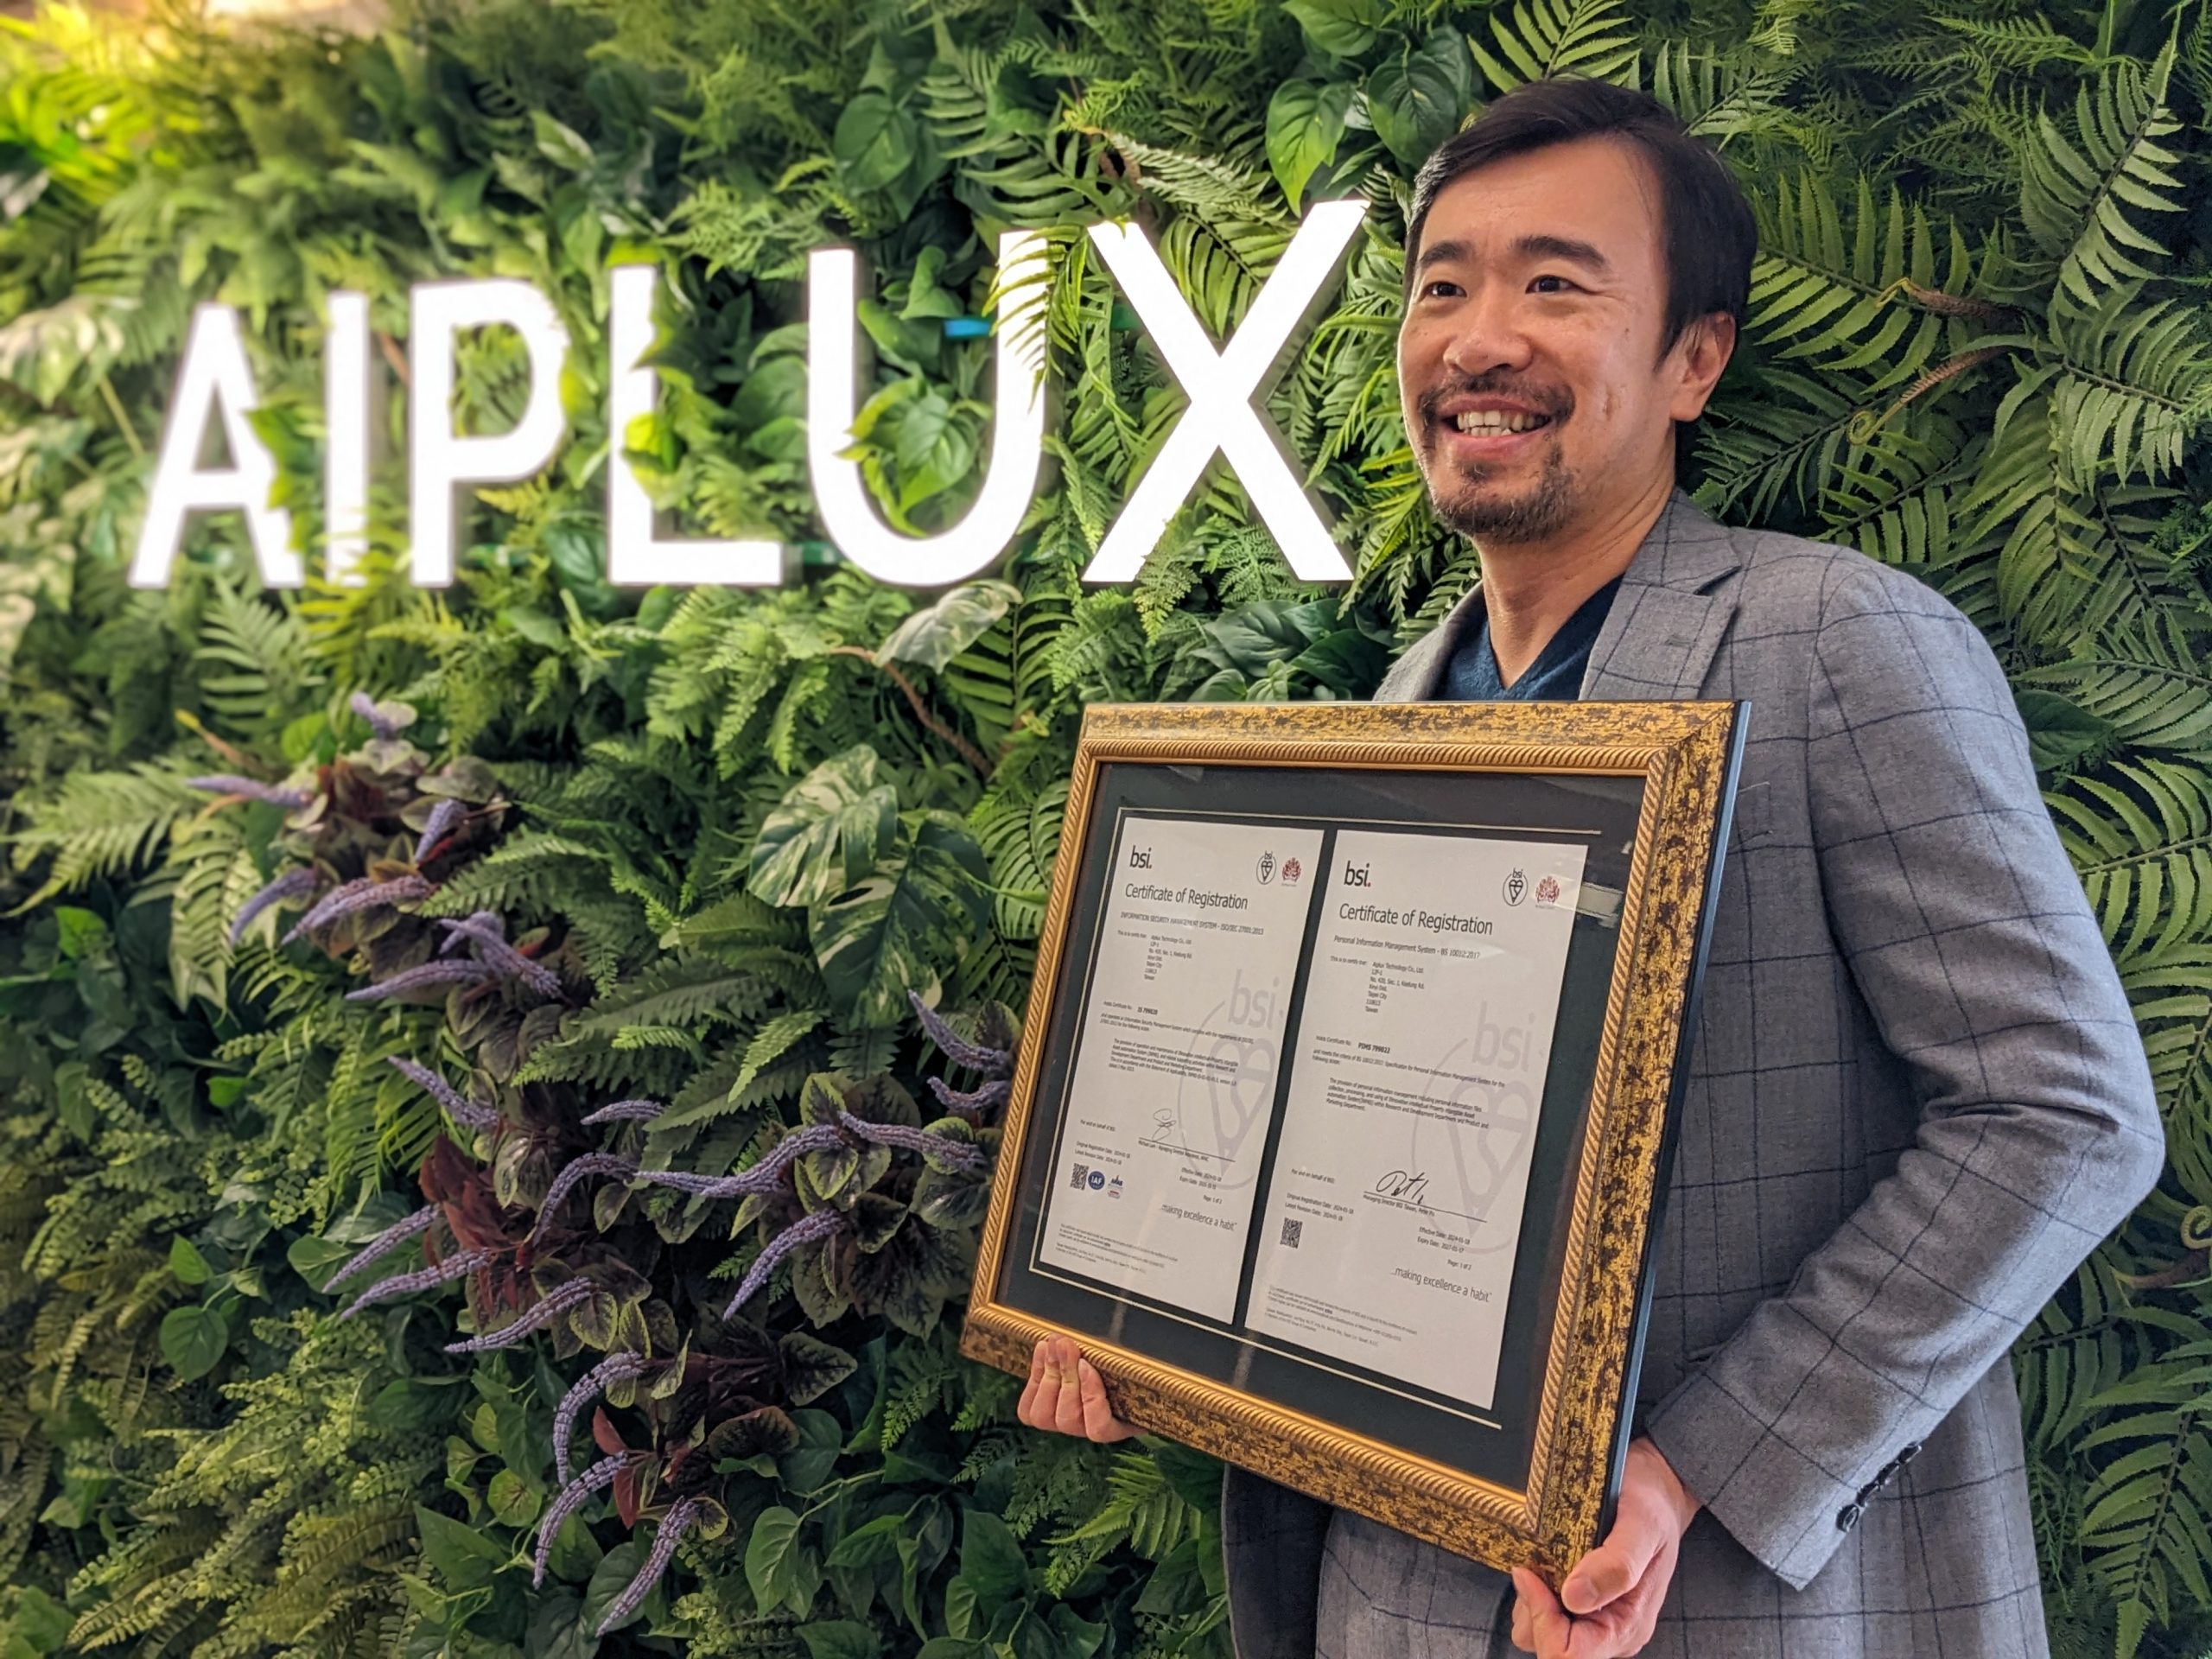 Alfred Wu Aiplux CEO & Founder